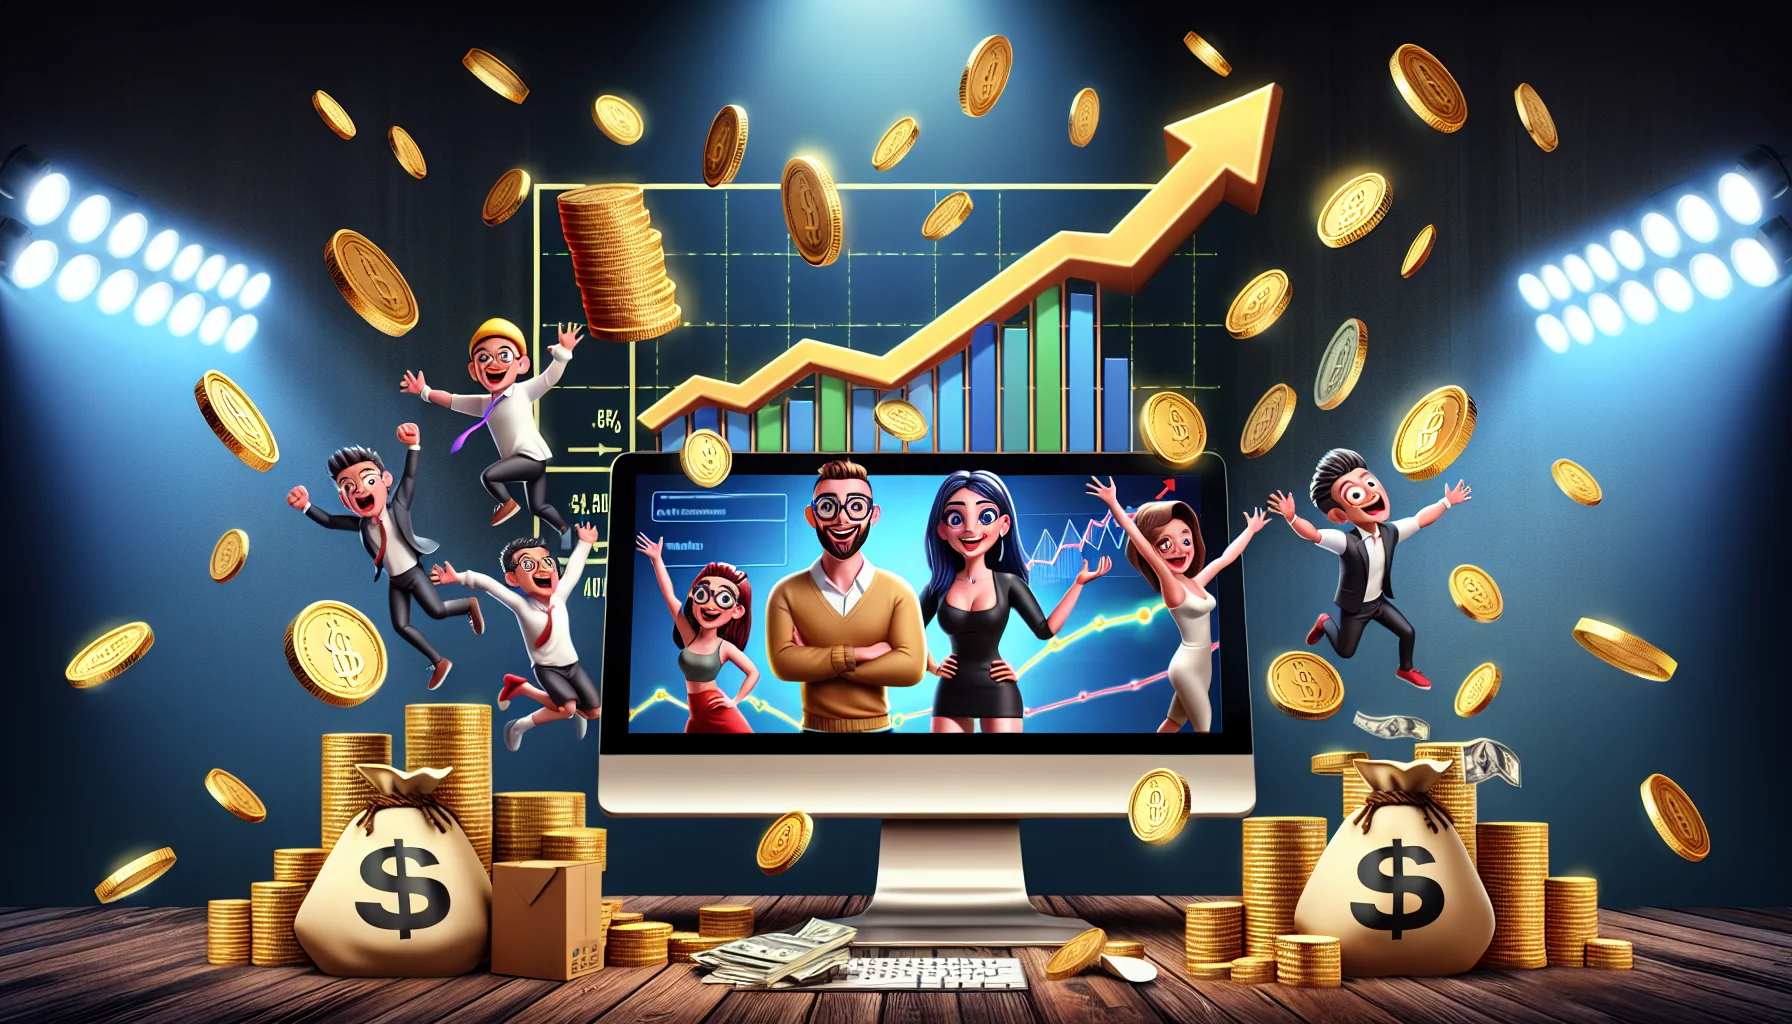 Imagine an amusing and realistic scenario illustrating an affiliate program similar to those run by notable online marketplaces. The scene unfolds within the digital world, encapsulating the potential of online earnings. Picture a computer screen displaying lively growth charts and rising arrows, symbolizing the growth in income. Beside the screen, stacks of gold coins shimmer, epitomizing the financial rewards of affiliate marketing. Meanwhile, a couple of animated characters, a Middle-Eastern woman and a Hispanic man, potrayed as little tech wizards, dance around in excitement, their joyful faces reflecting the enticing possibilities of making money online.